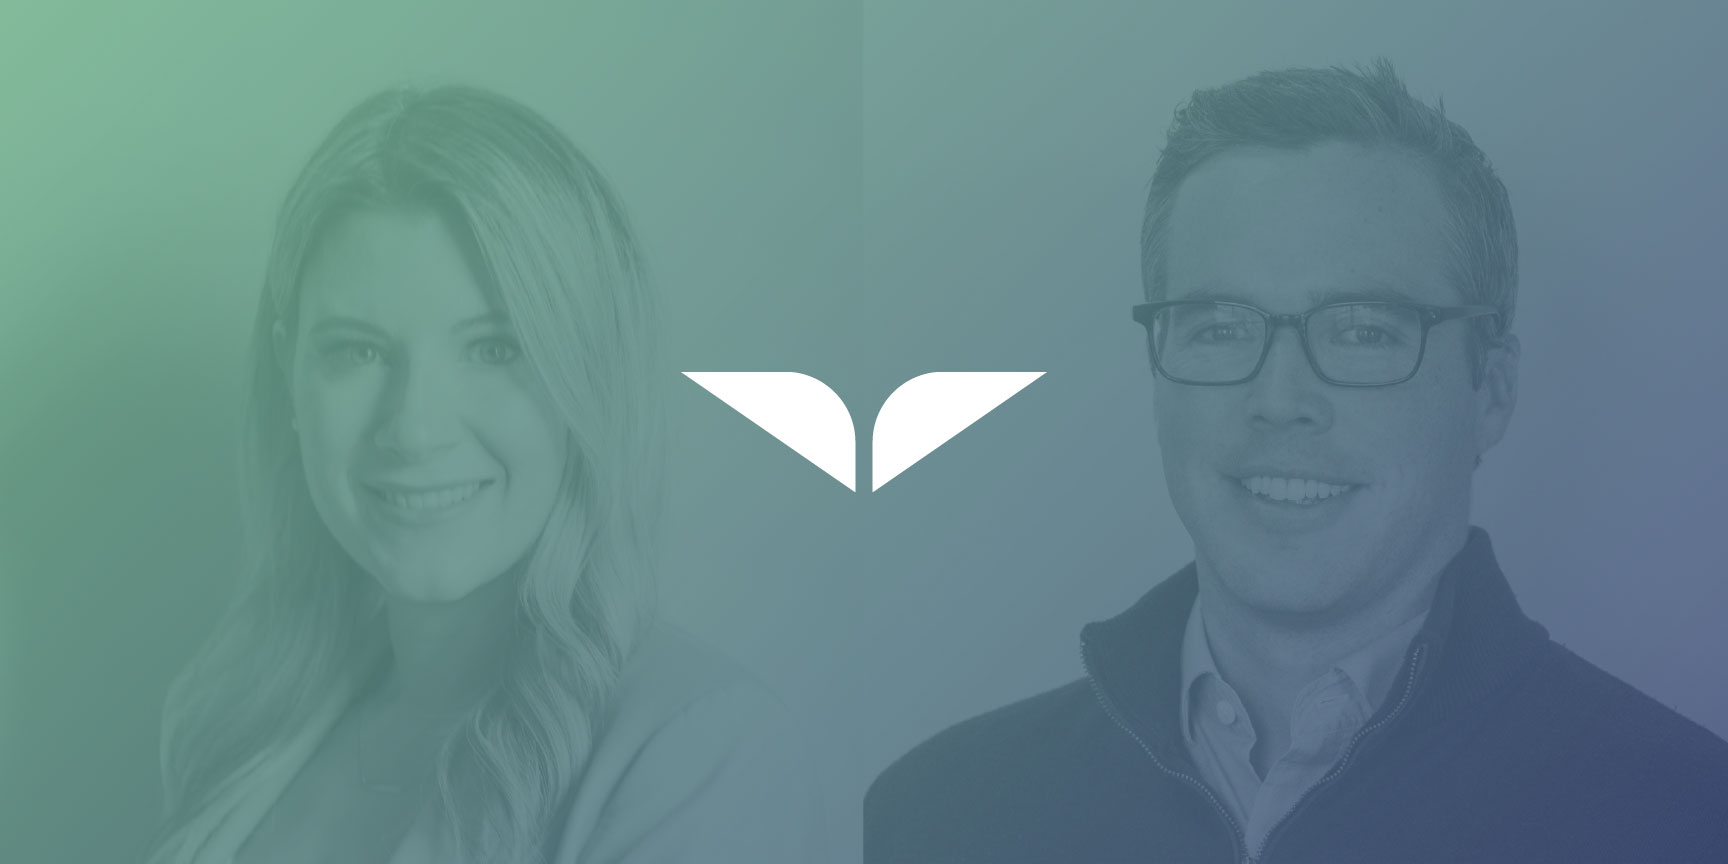 Wayspring Announces Leadership Promotions to Accelerate Growth and Excellence - Tanya Deane and Scott Royston